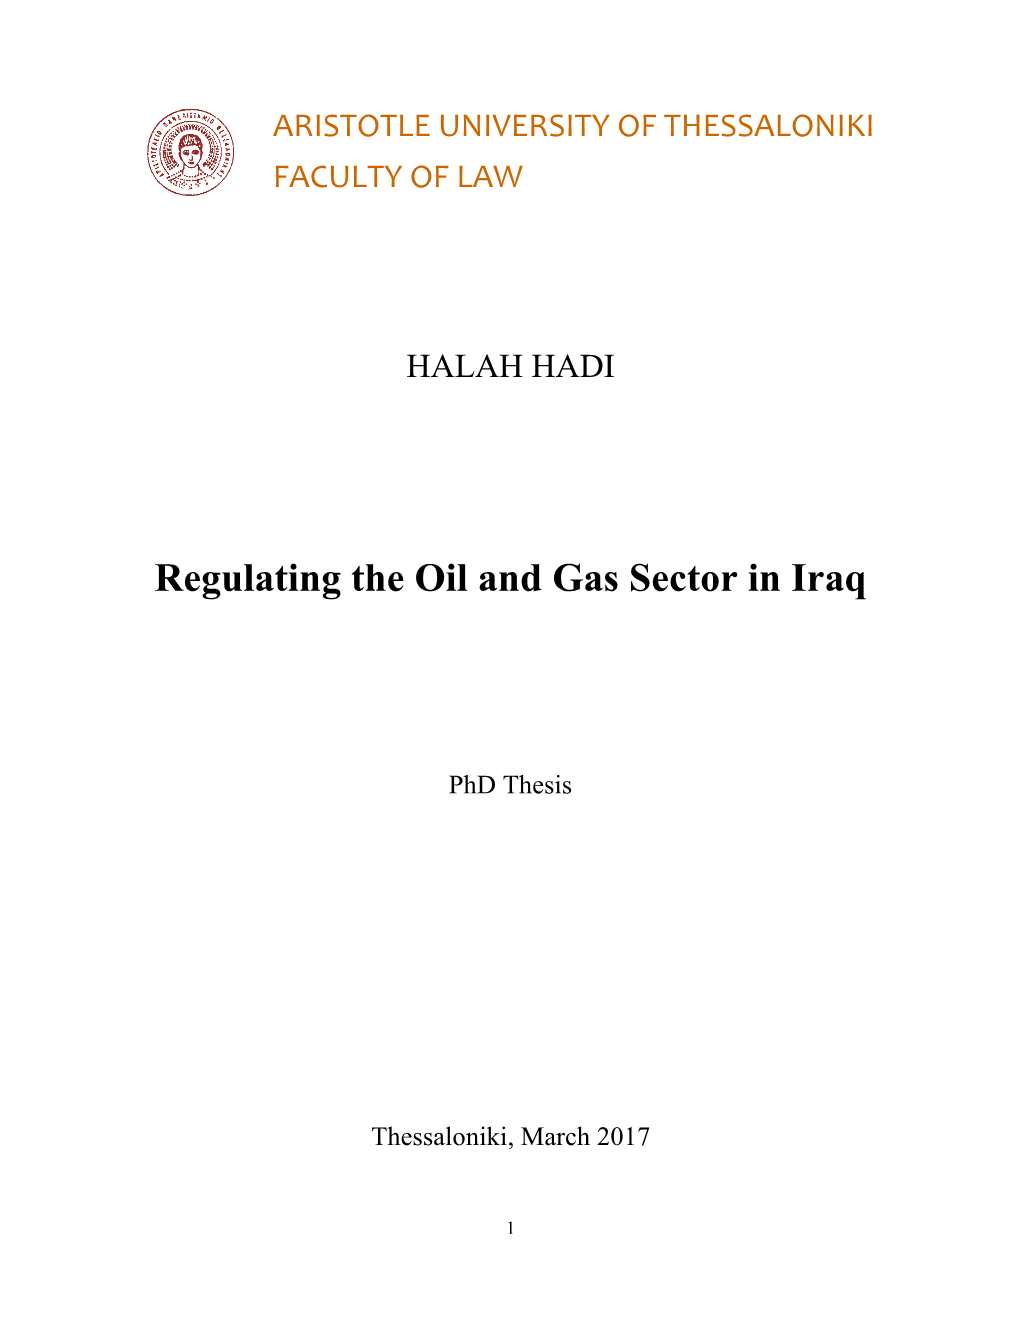 Regulating the Oil and Gas Sector in Iraq